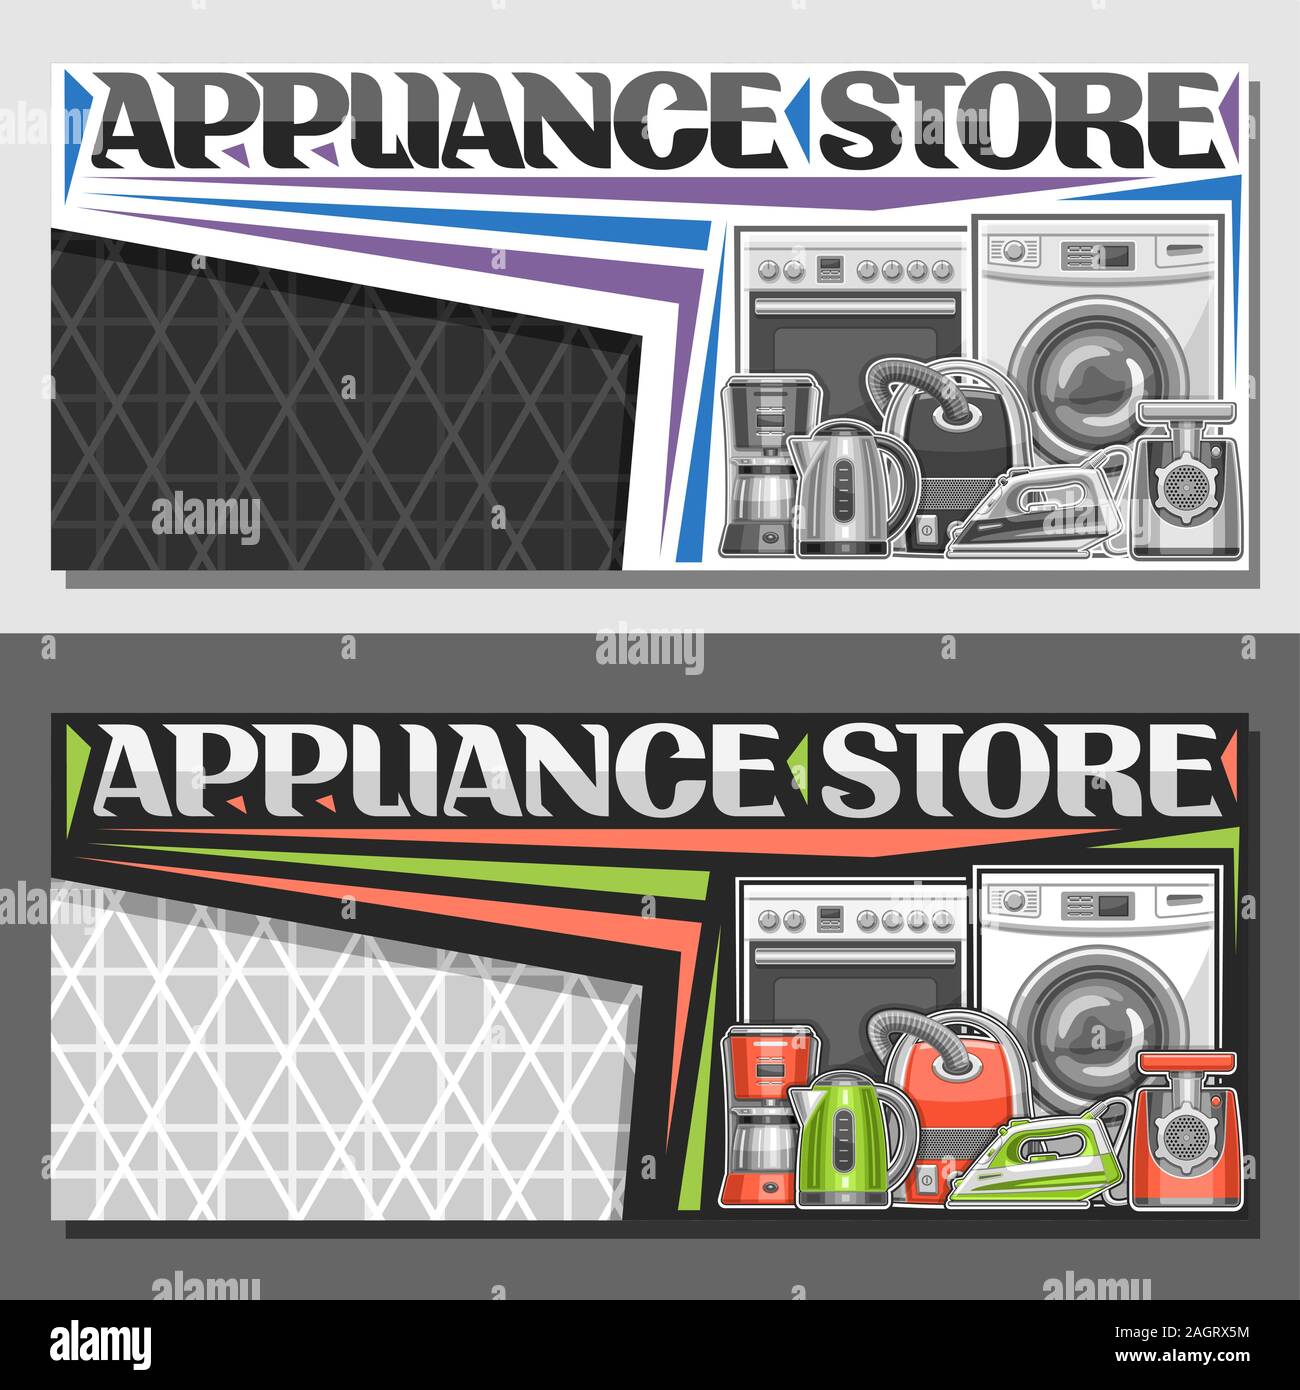 Vector layout for Appliance Store with copy space, illustration of different red and green modern home appliances, decorative font for words appliance Stock Vector